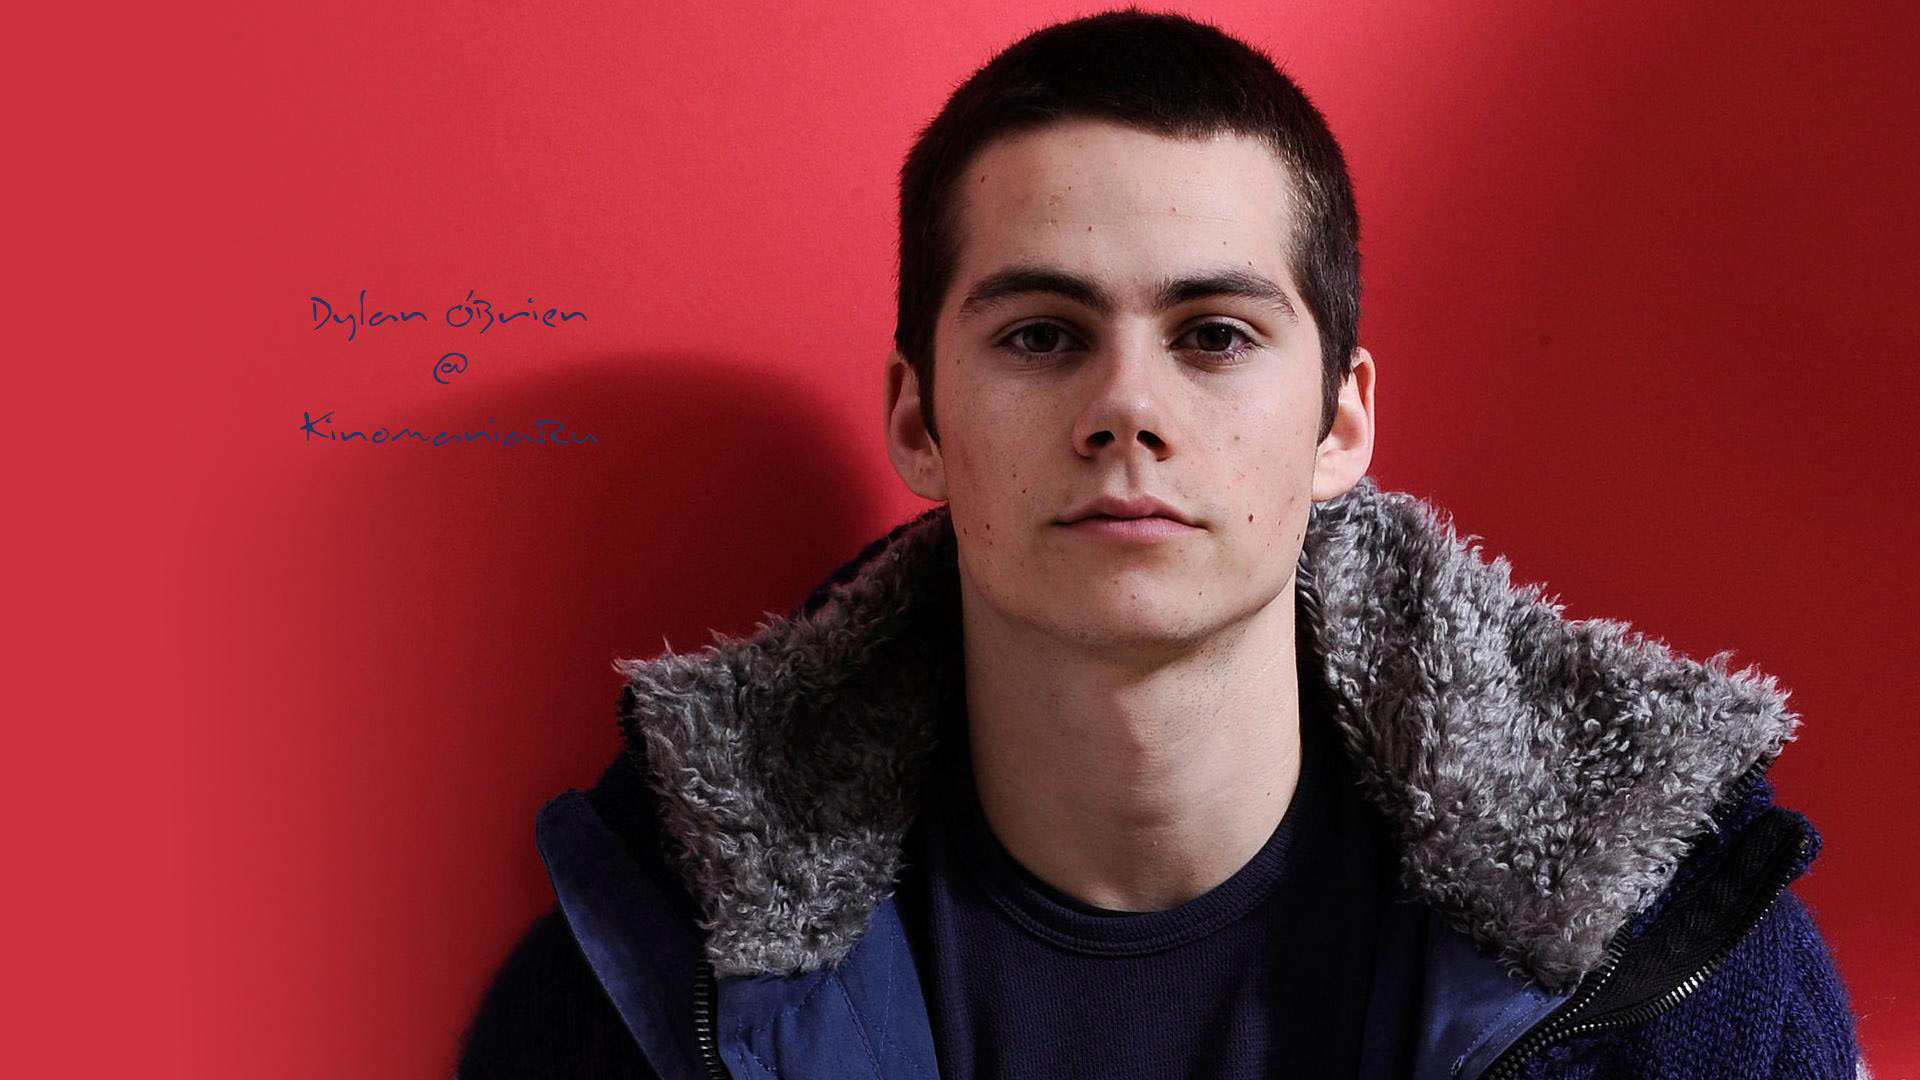 Dylan O Brien Wallpaper Image Photos Pictures Background